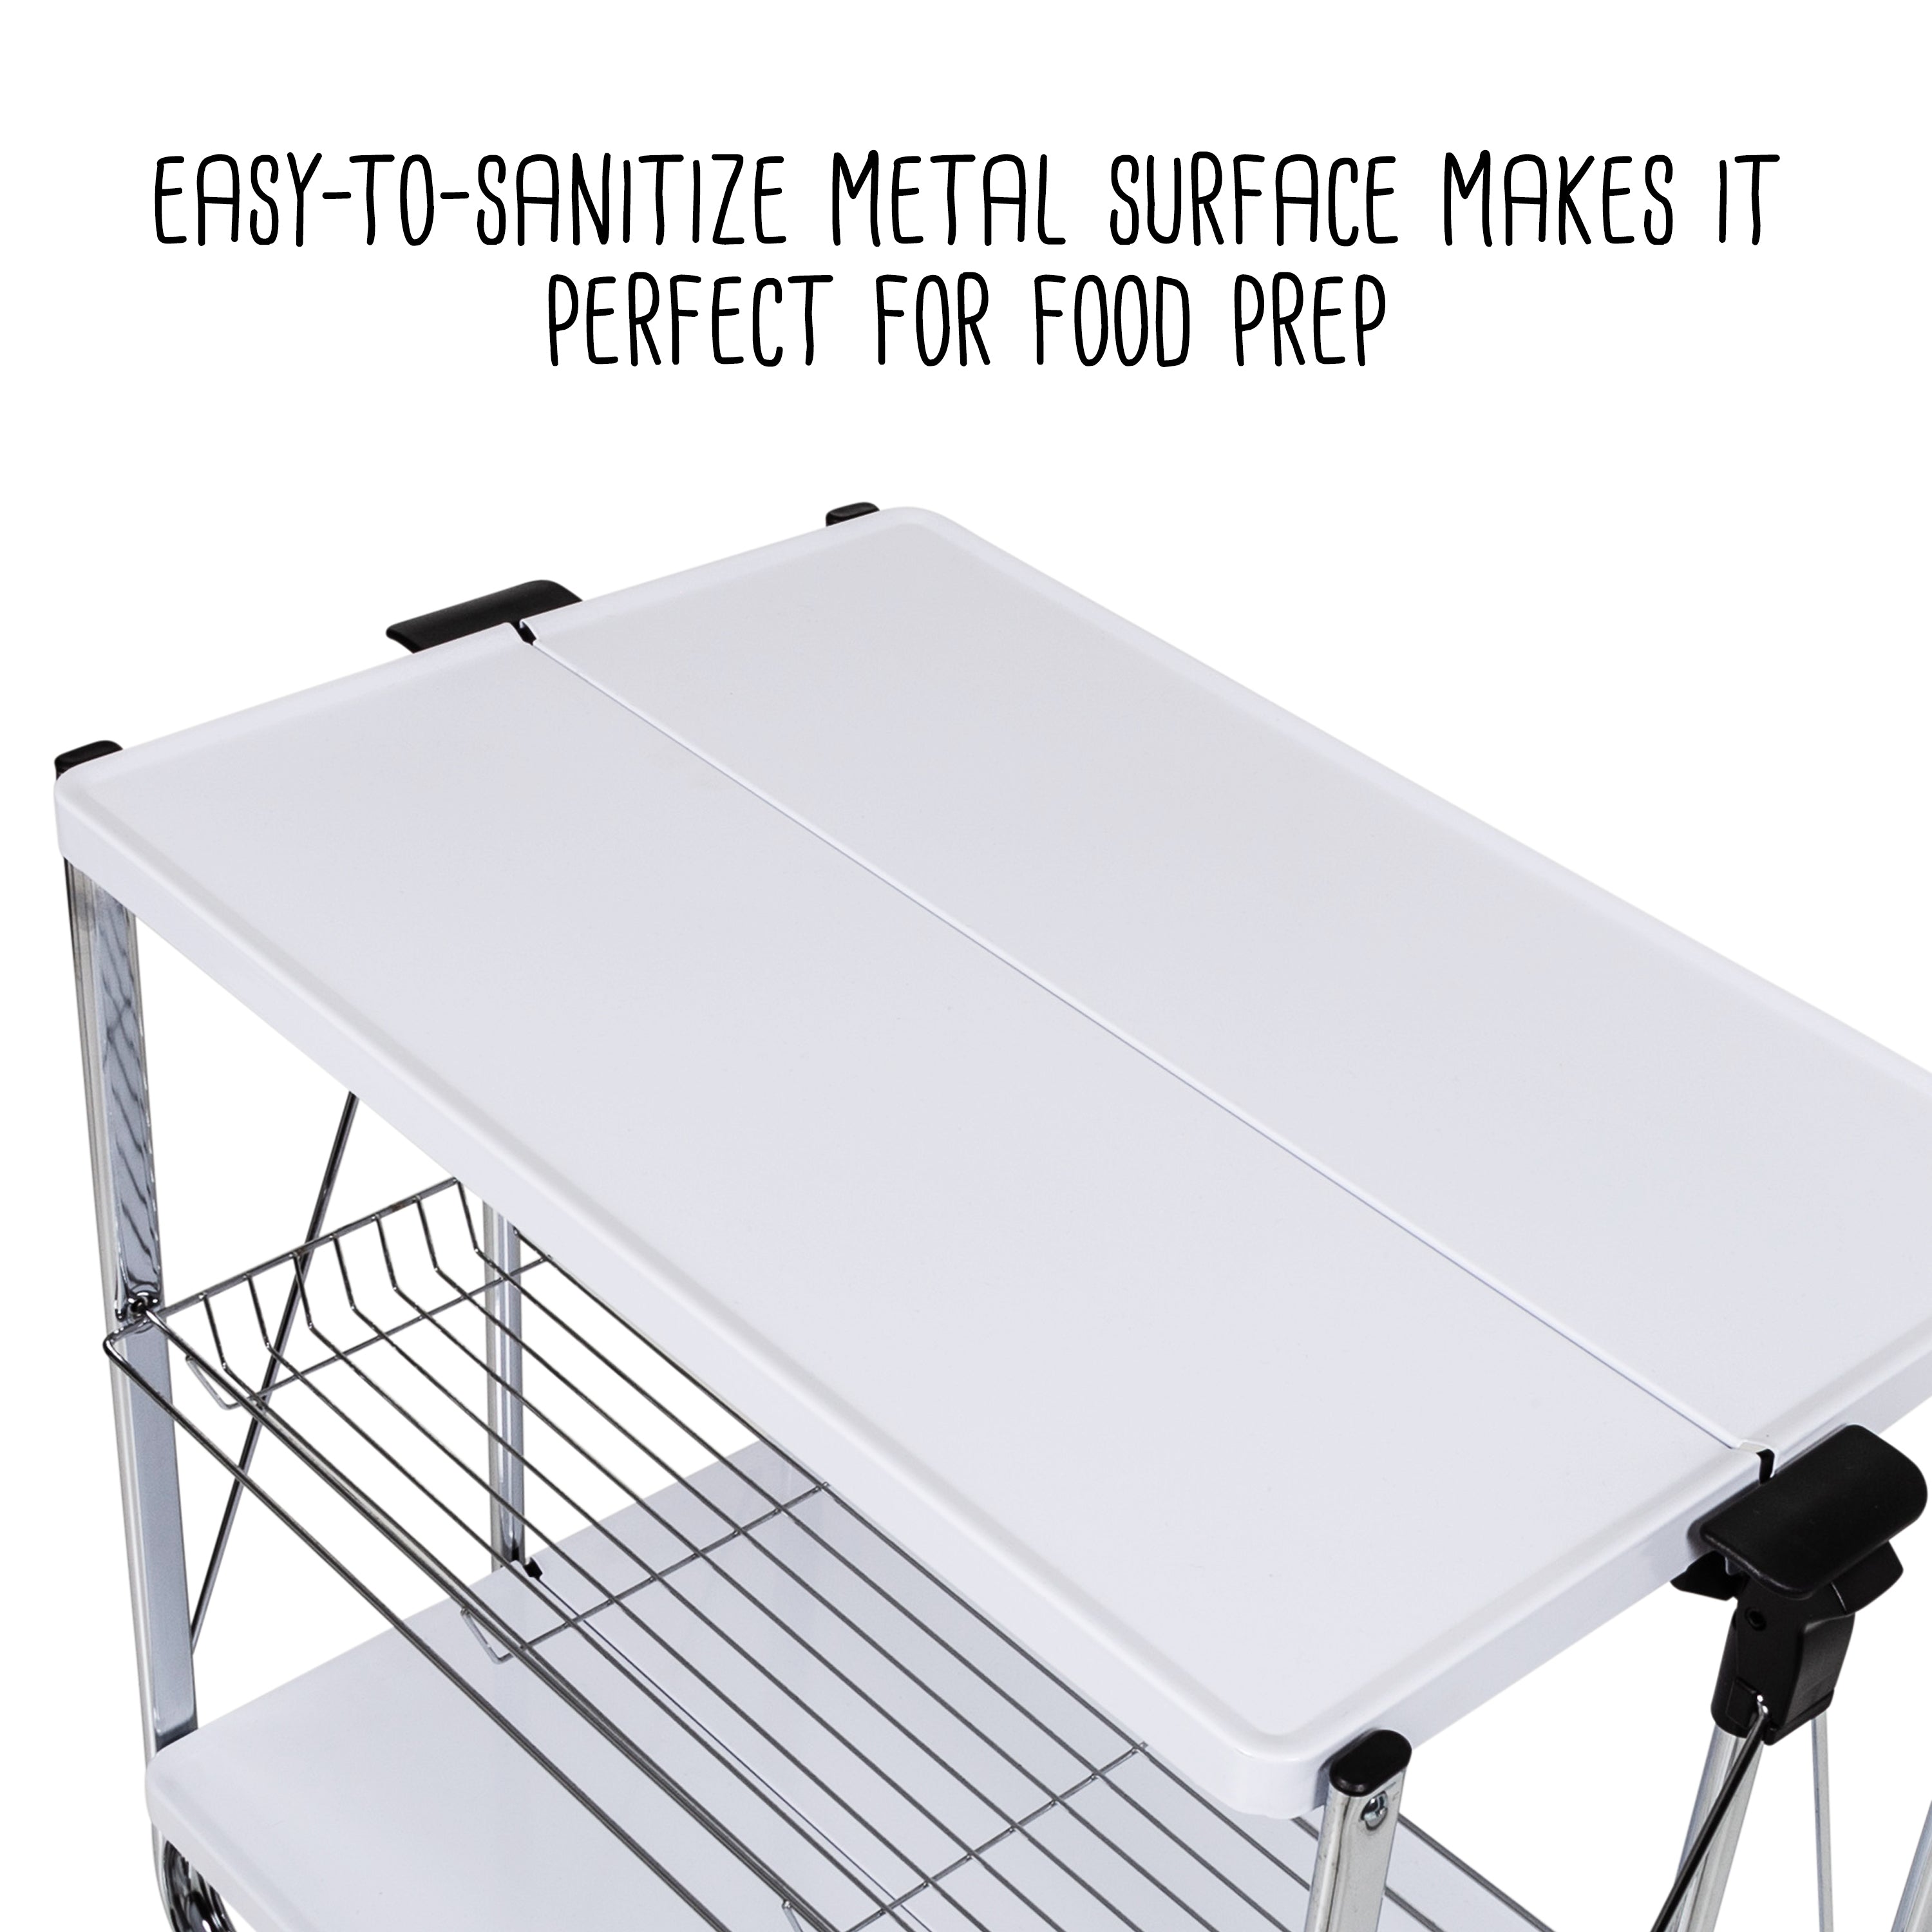 Modern Foldable Kitchen/Craft Cart with Wheels